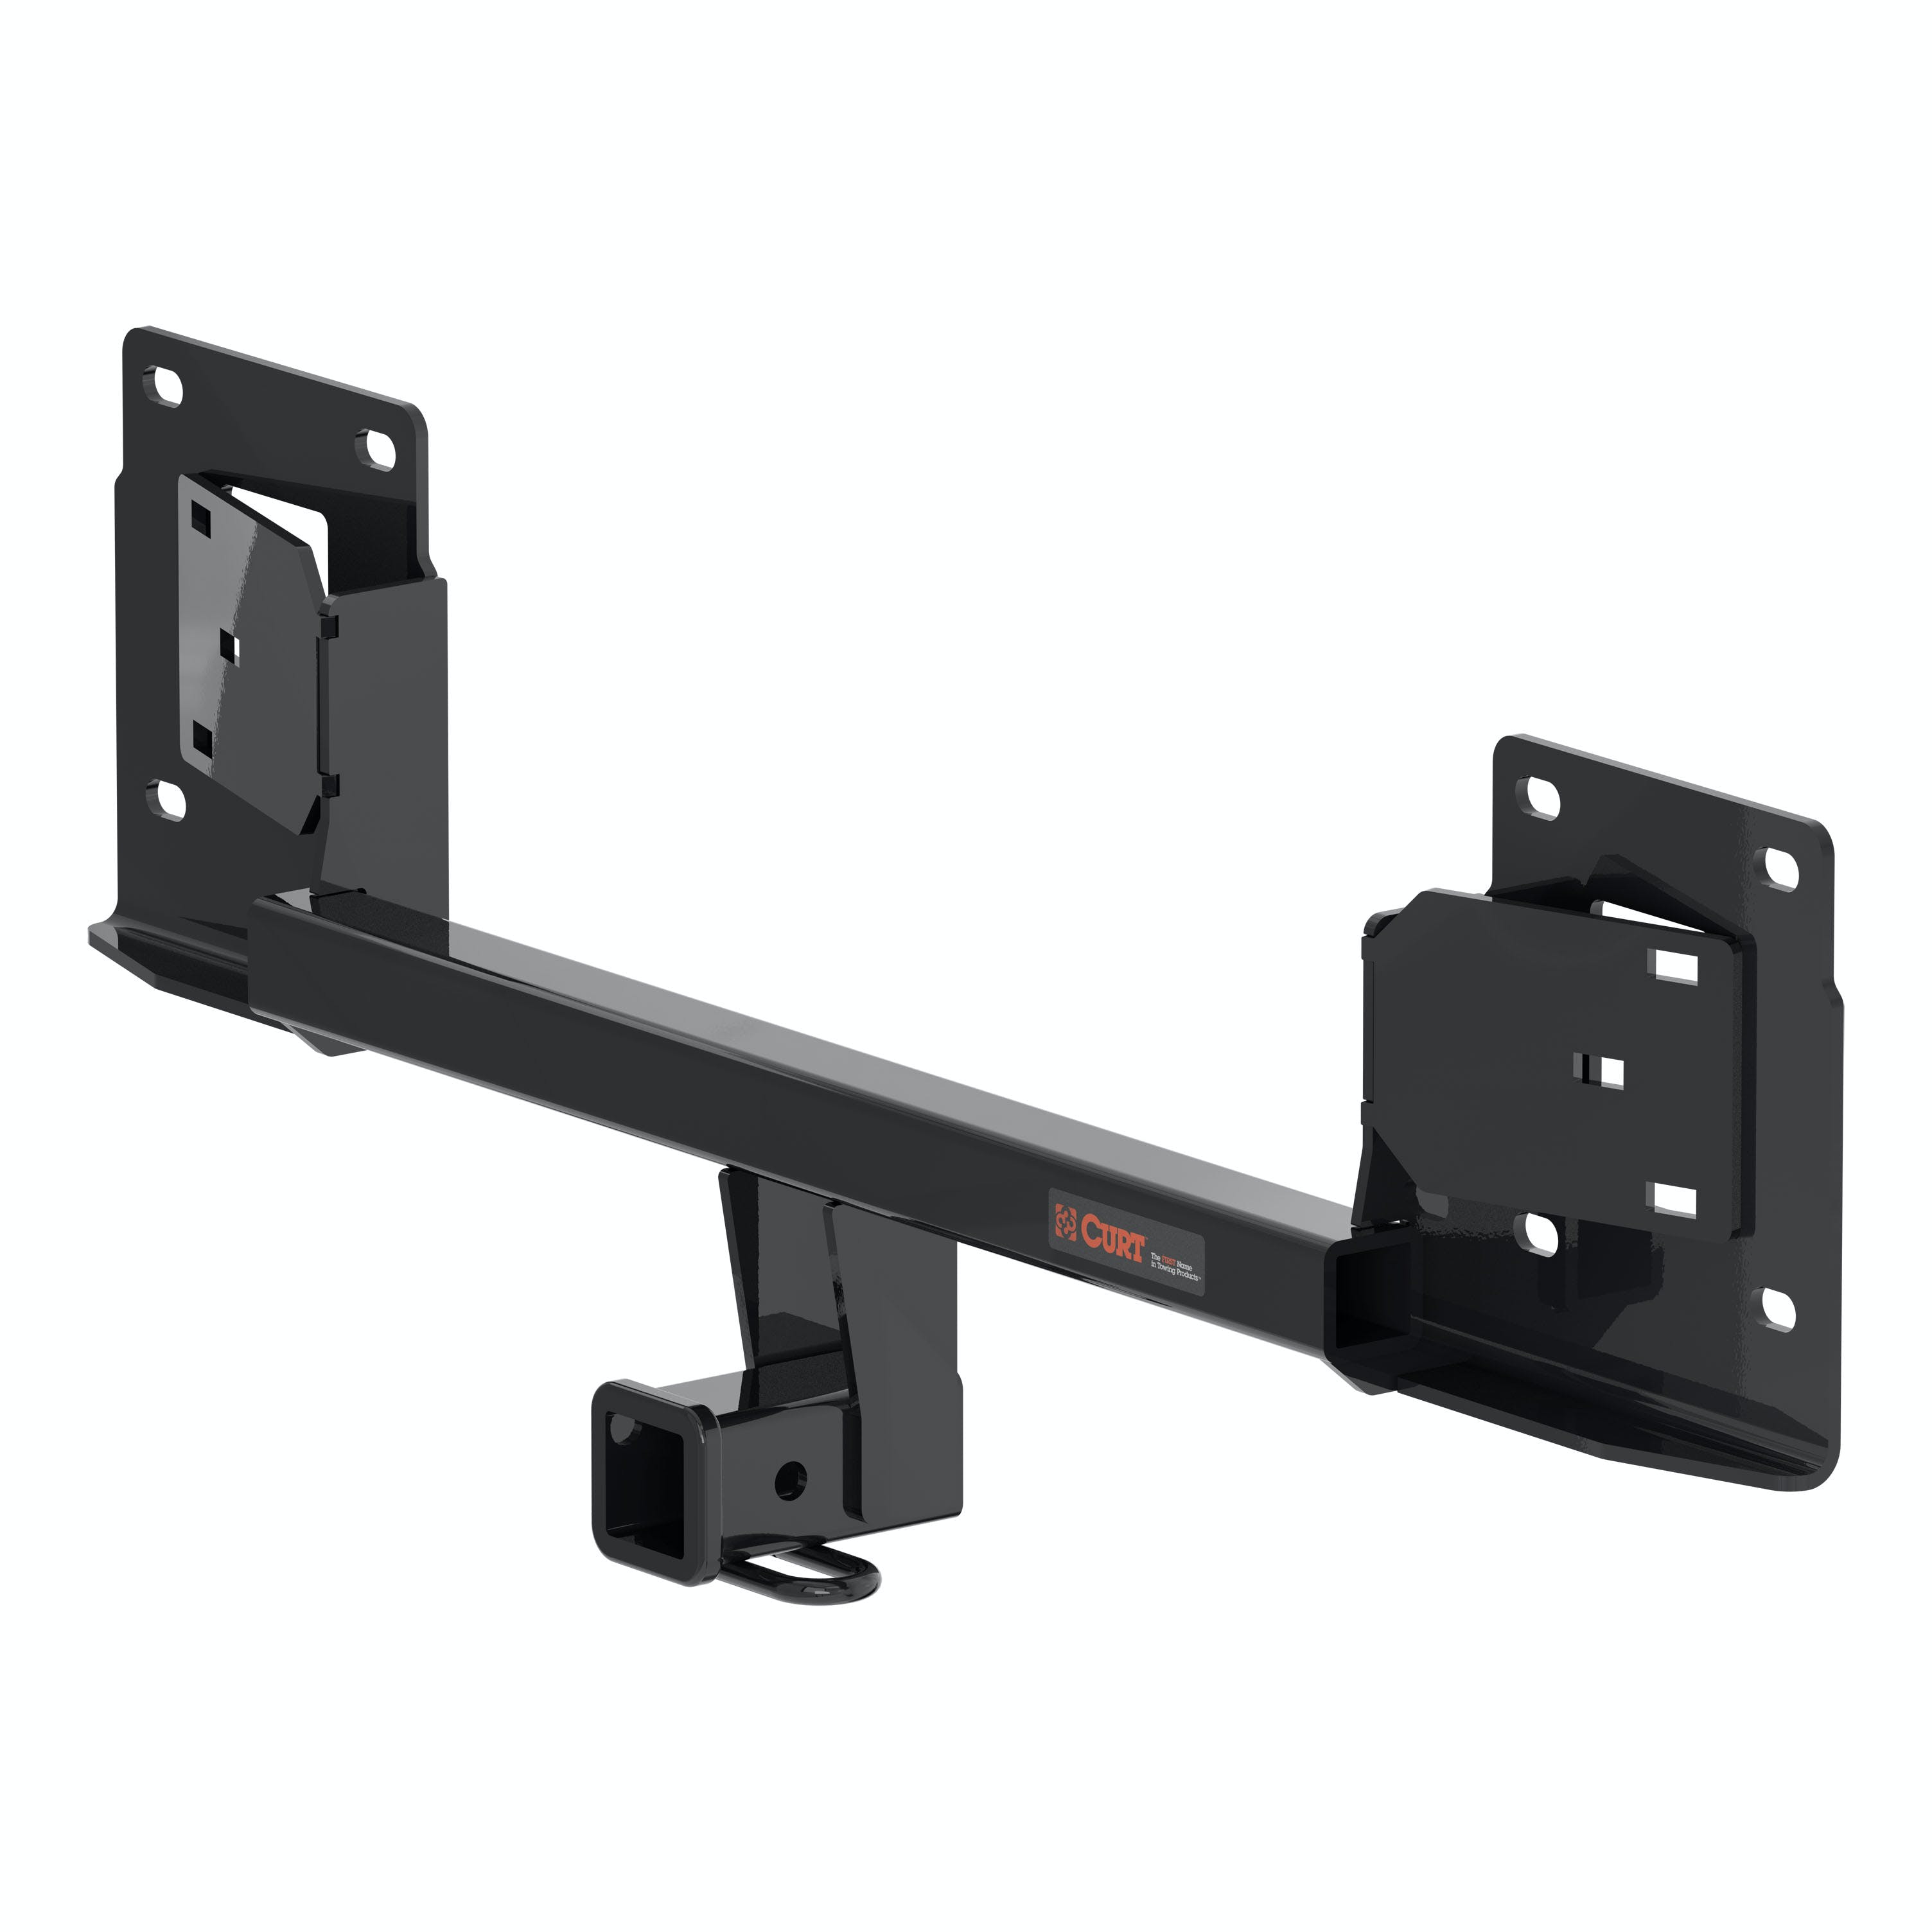 CURT 13449 Class 3 Trailer Hitch with 2 Receiver